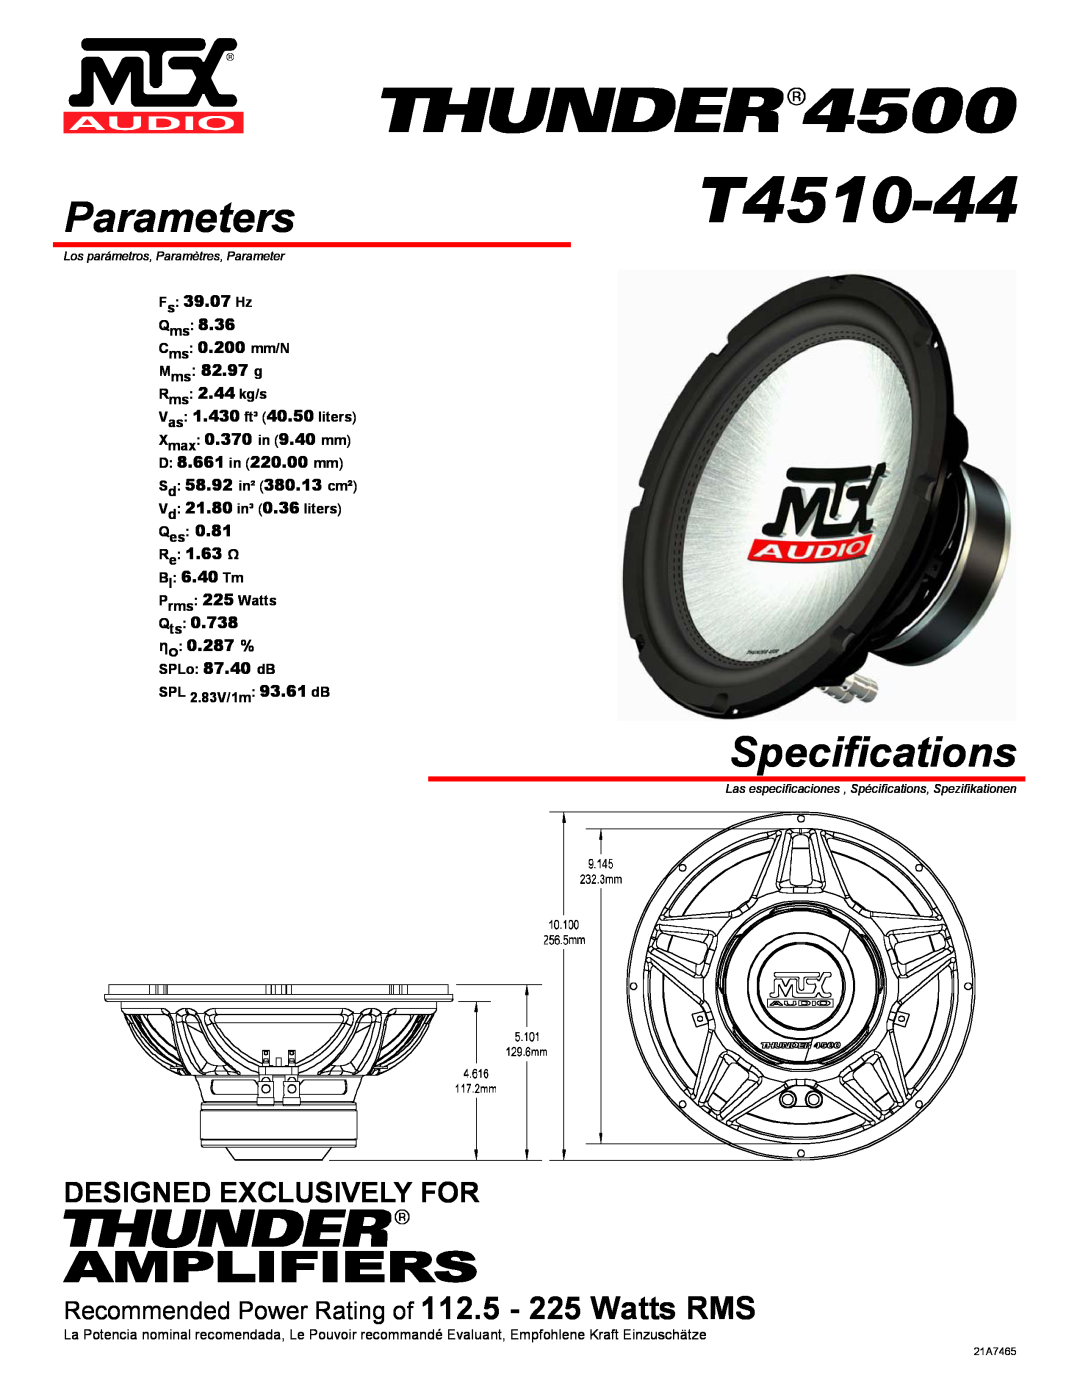 MTX Audio T4510-44 specifications Parameters, Specifications, Amplifiers, Designed Exclusively For, Fs 39.07 Hz Qms 